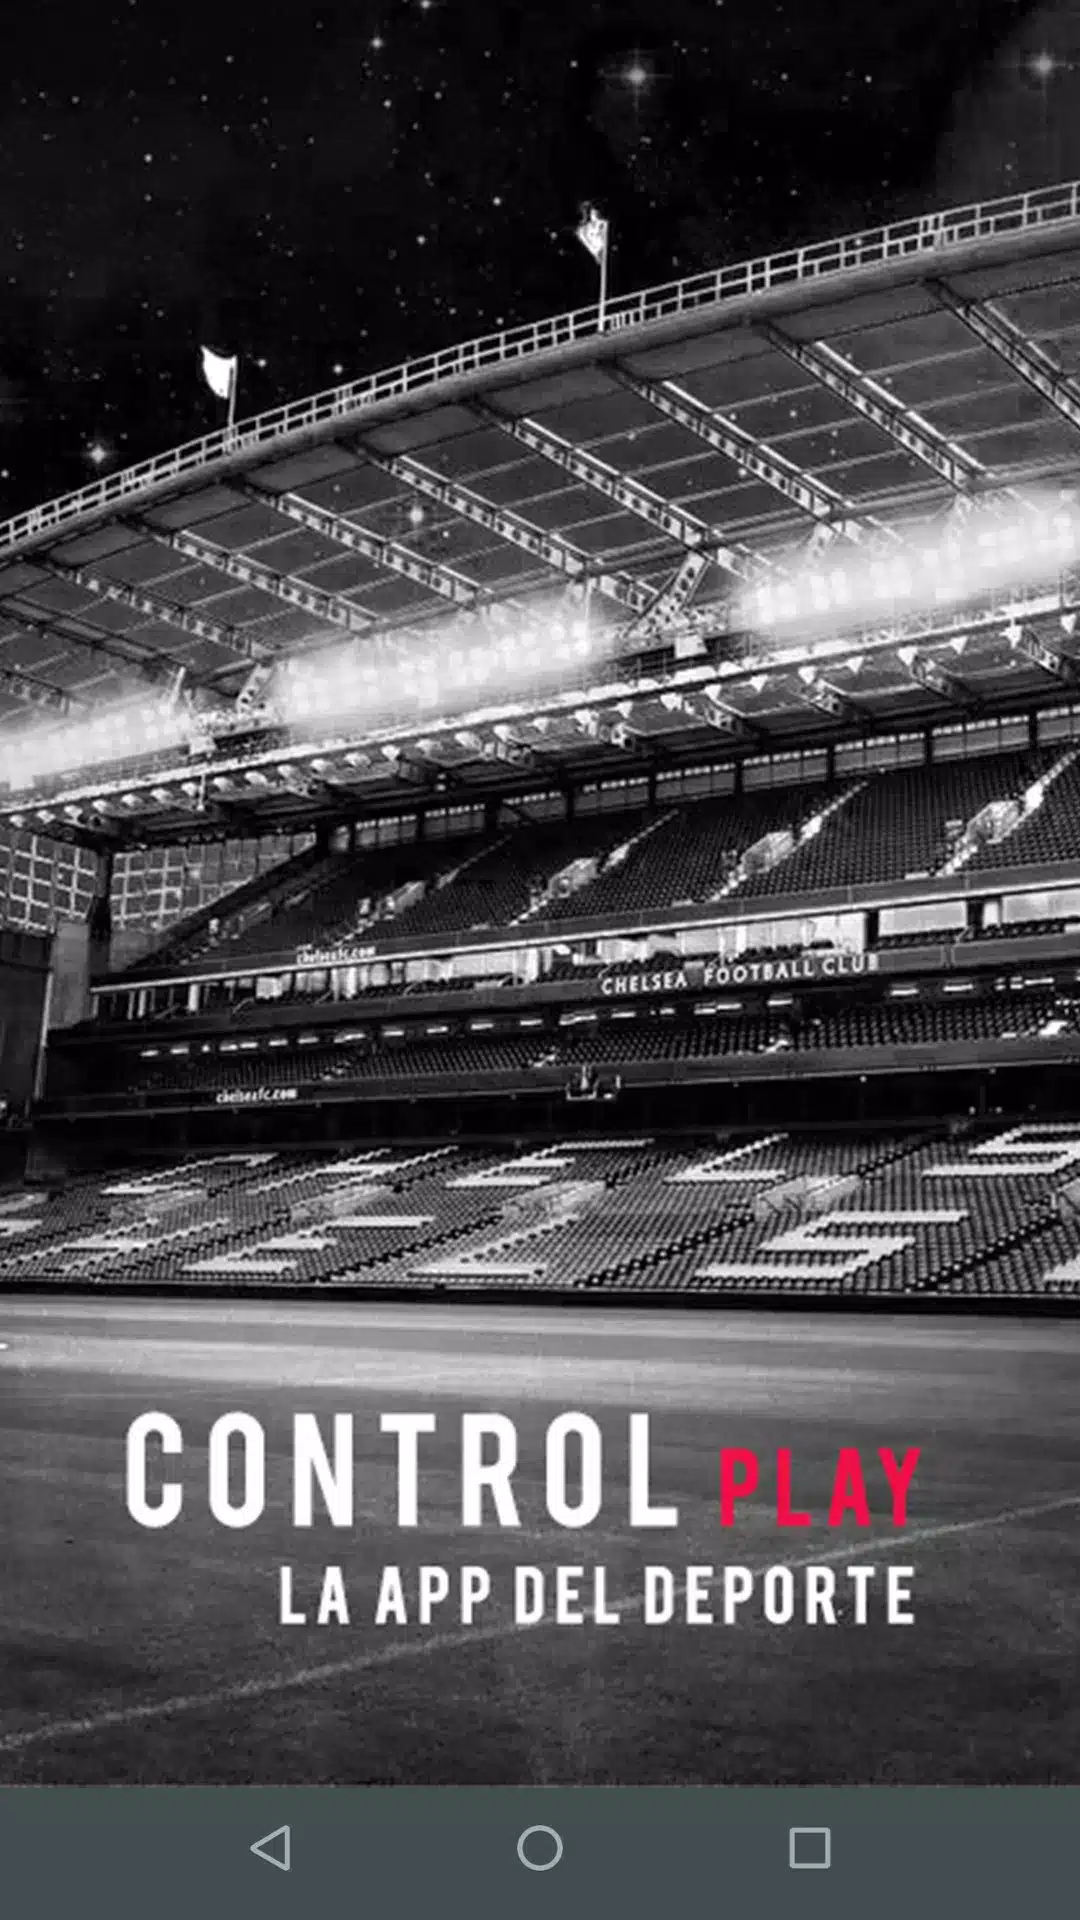 Control play Image 2